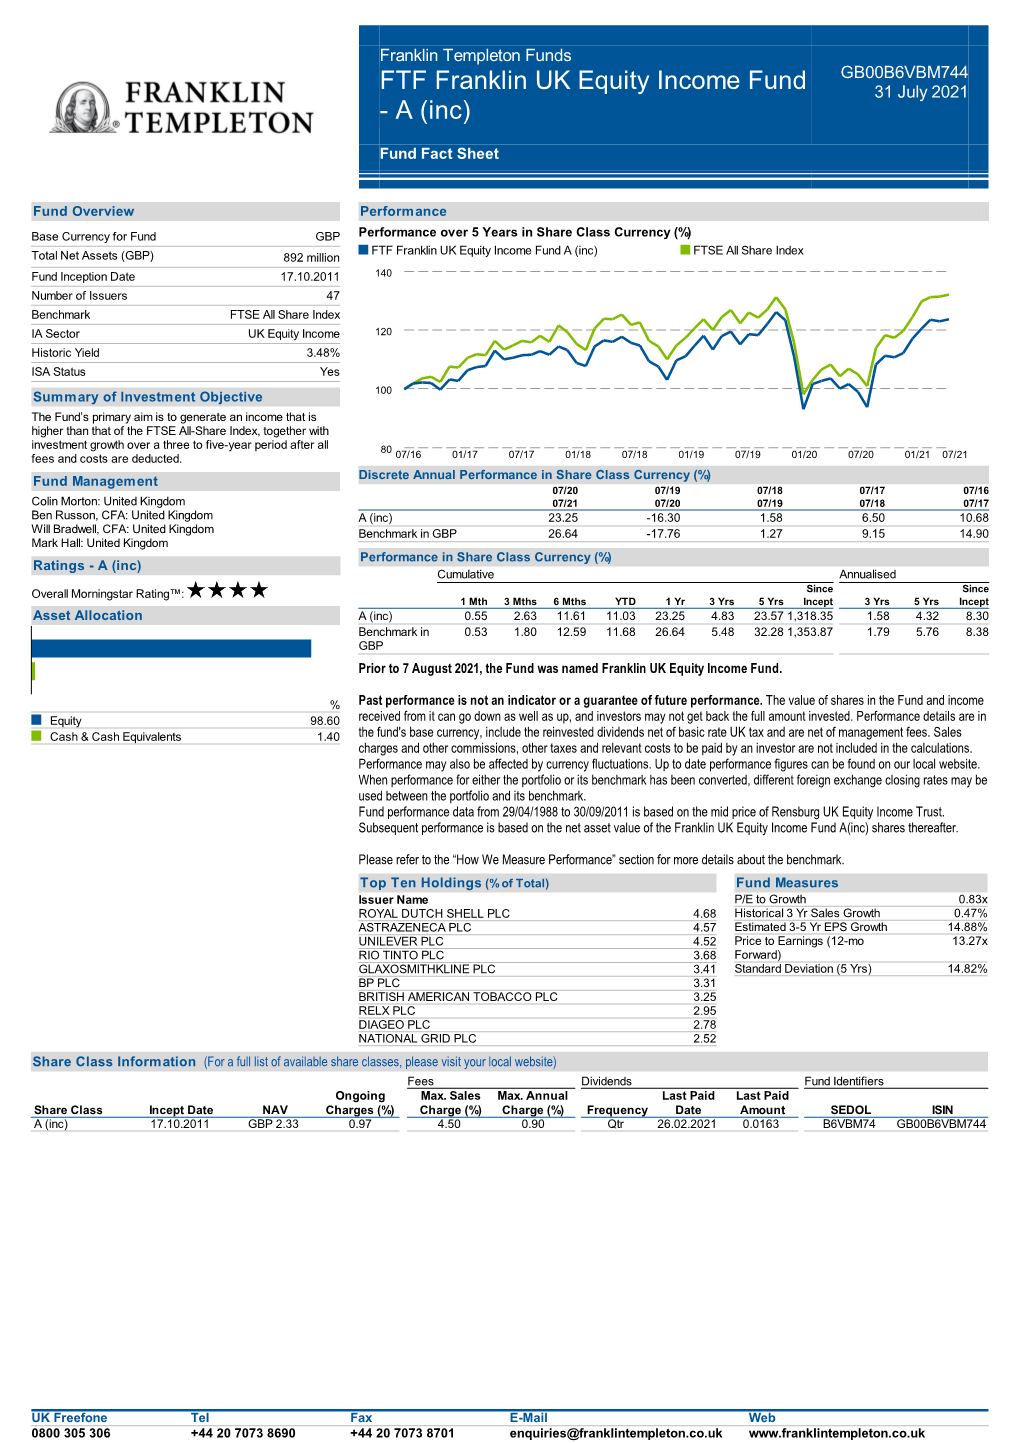 FTF Franklin UK Equity Income Fund 31 July 2021 - a (Inc)